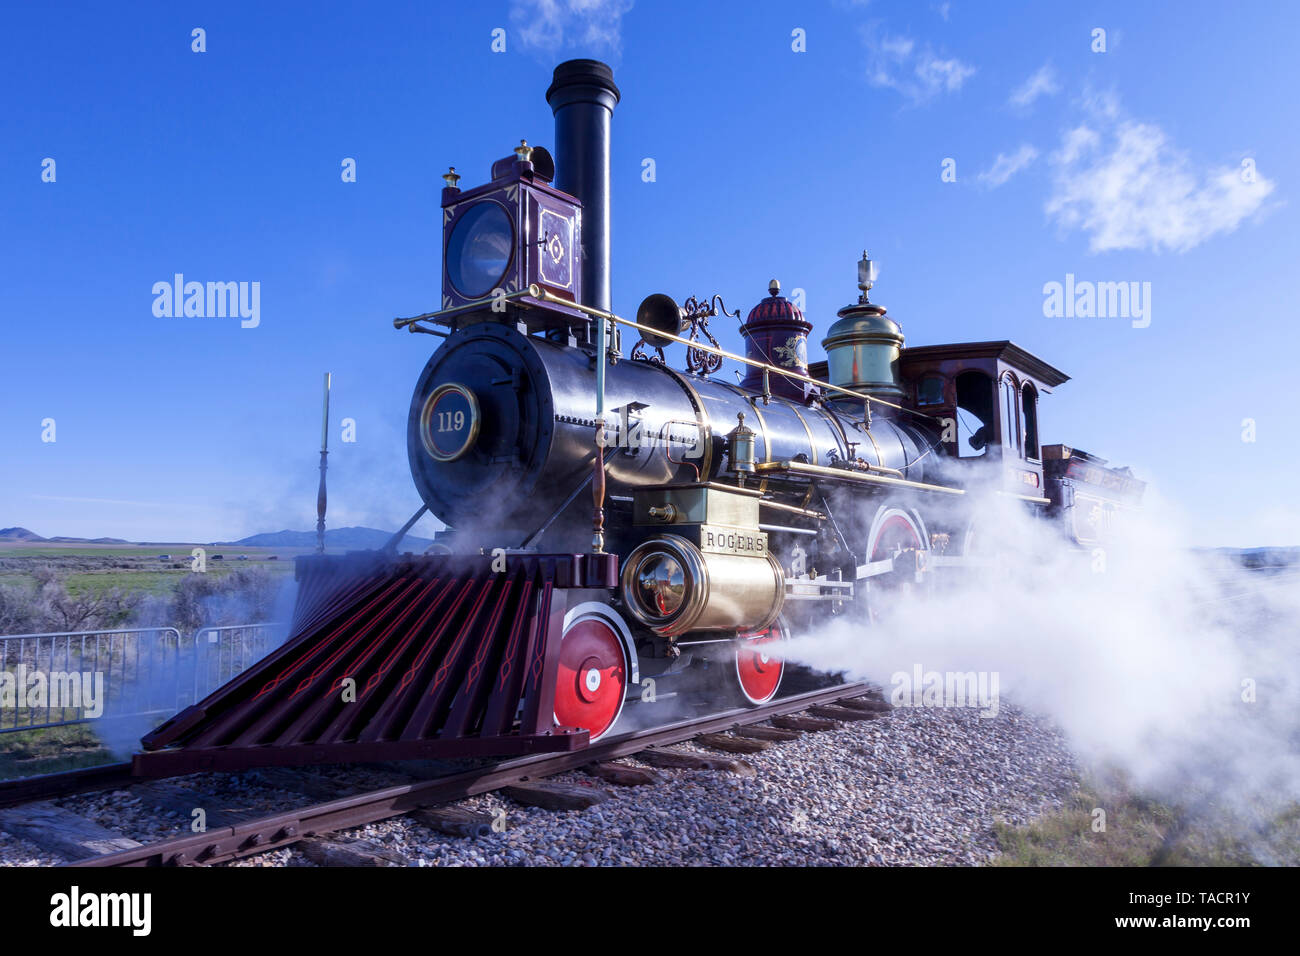 The Union Pacific Railroad's locomotive No. 119 belches steam as it makes its way into position for the ceremonies celebrating the 150th anniversary o Stock Photo